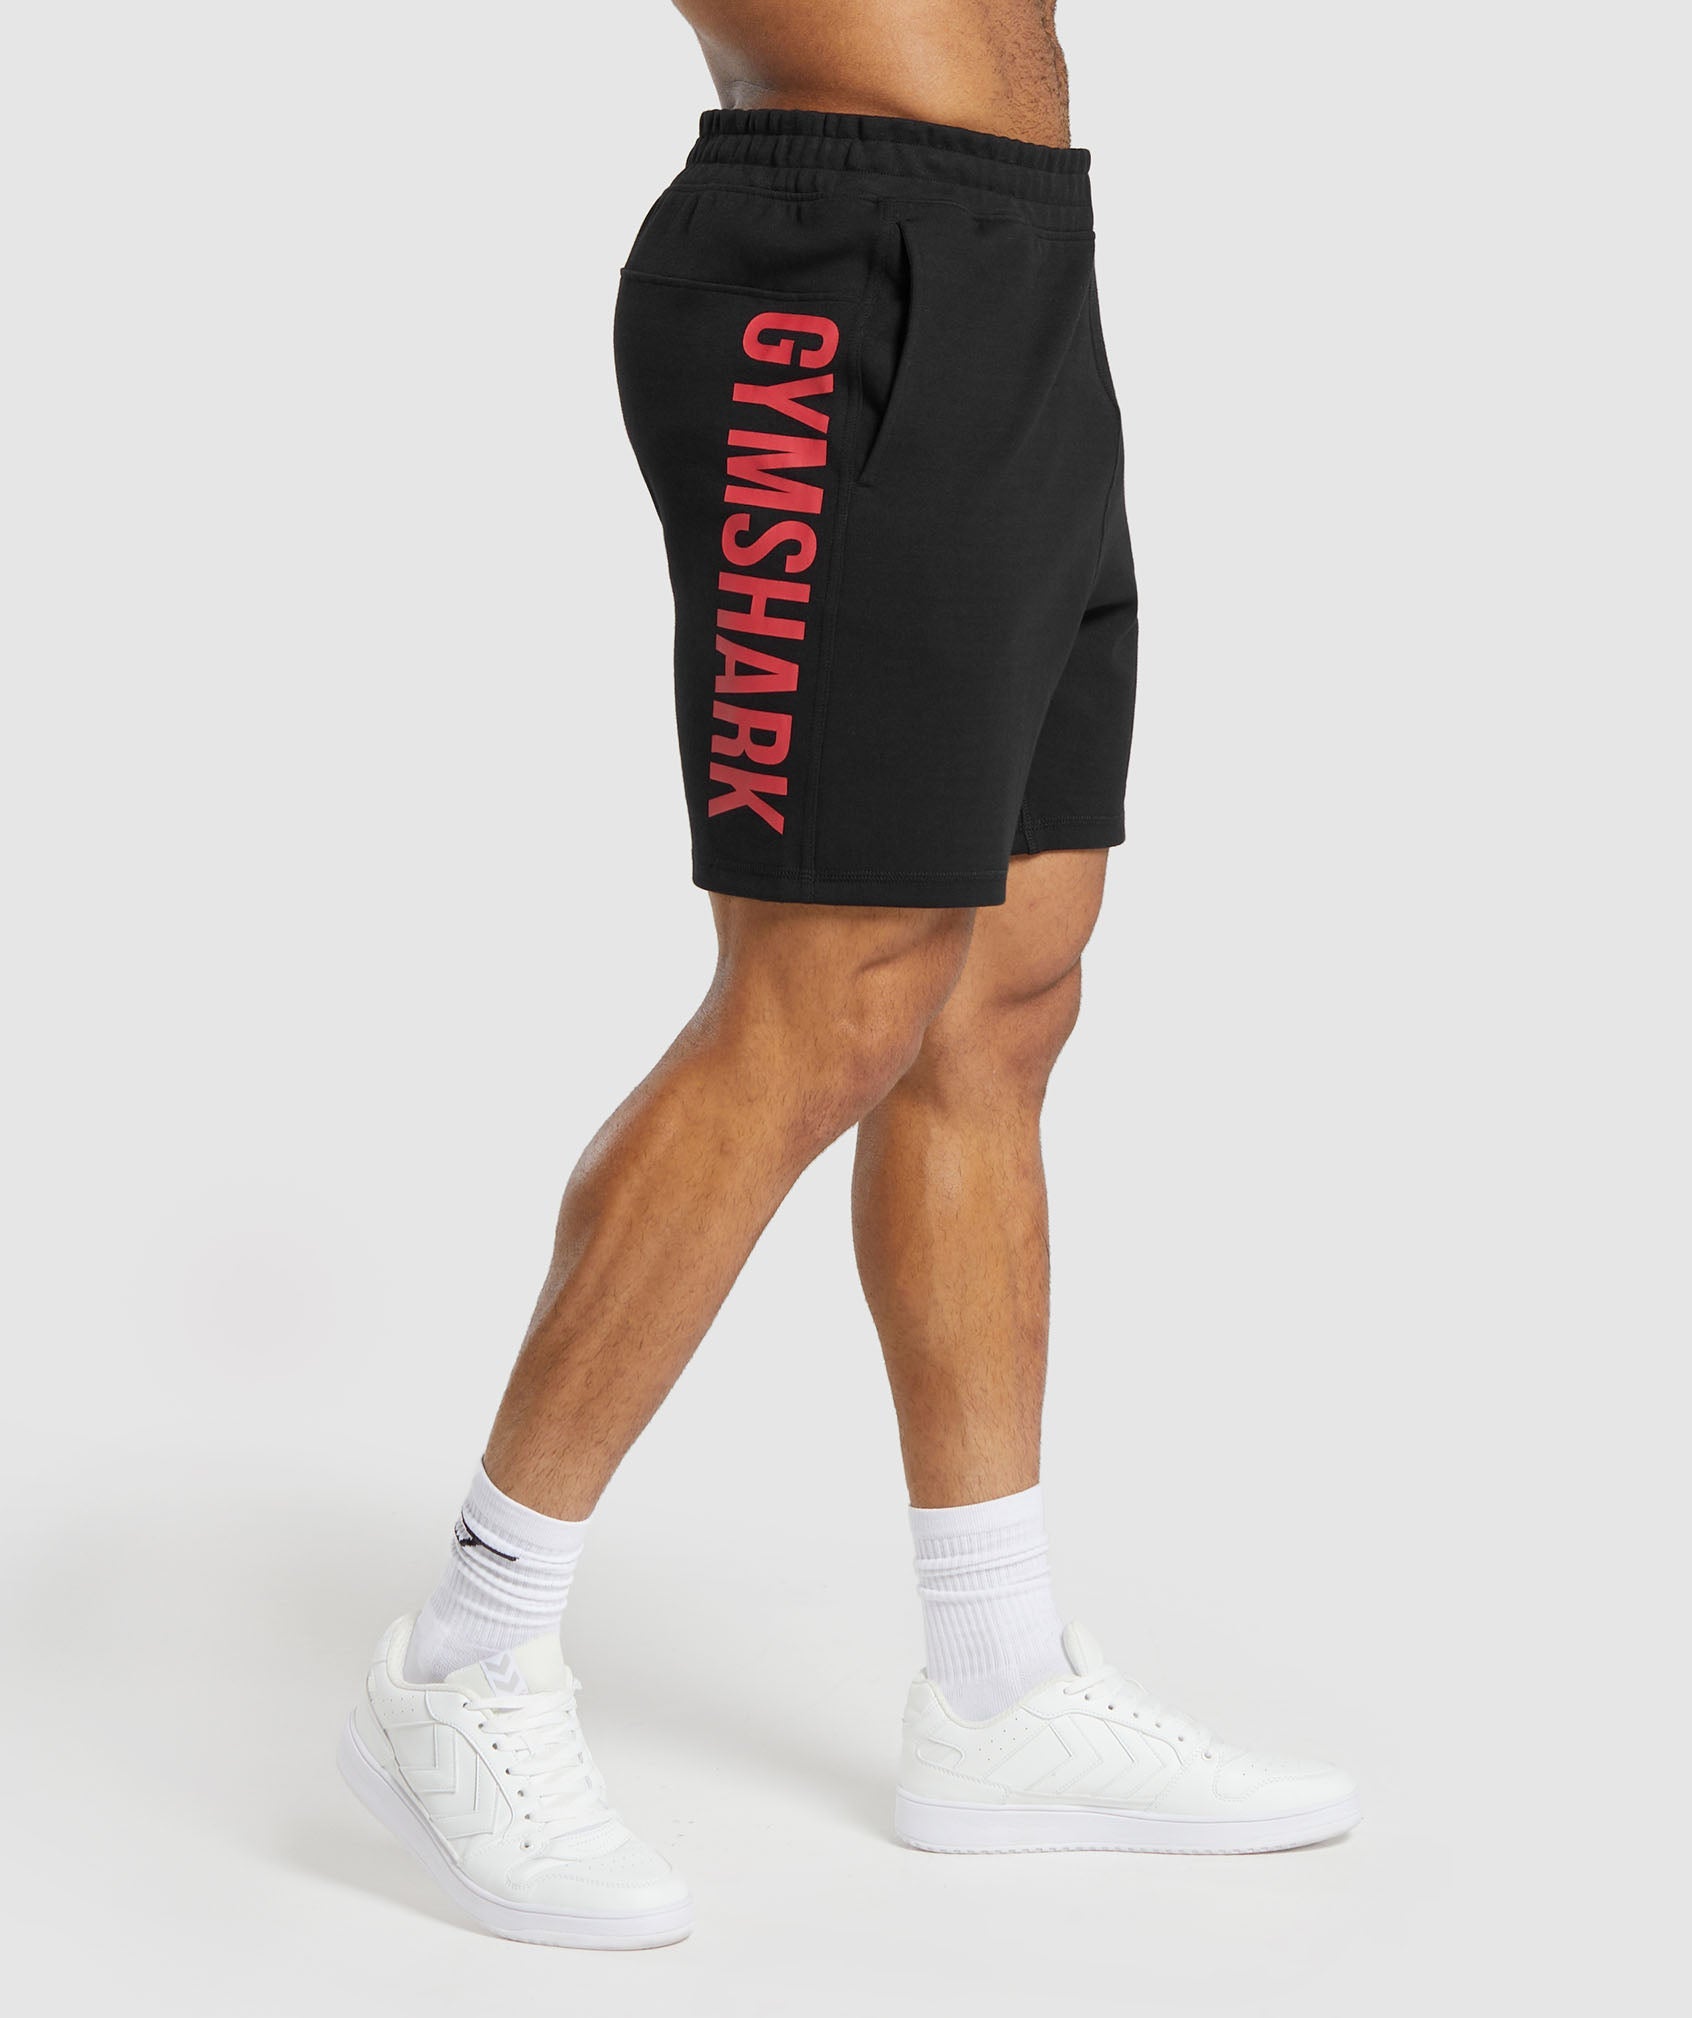 Impact Shorts in Black/Vivid Red - view 1